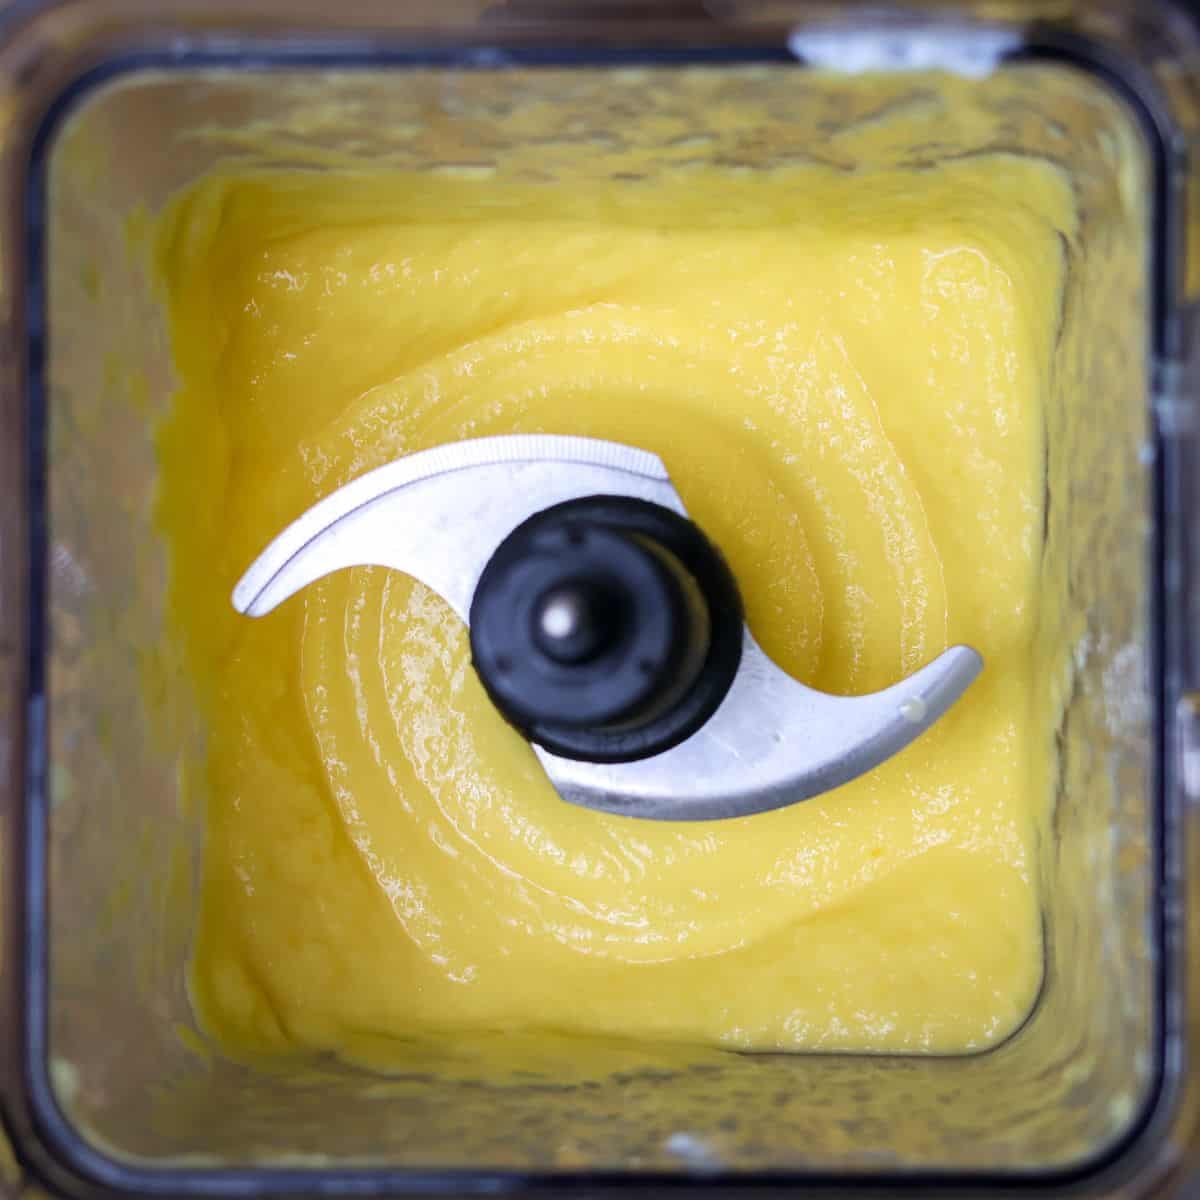 The final blend of a creamy mango smoothie view inside of a blender.